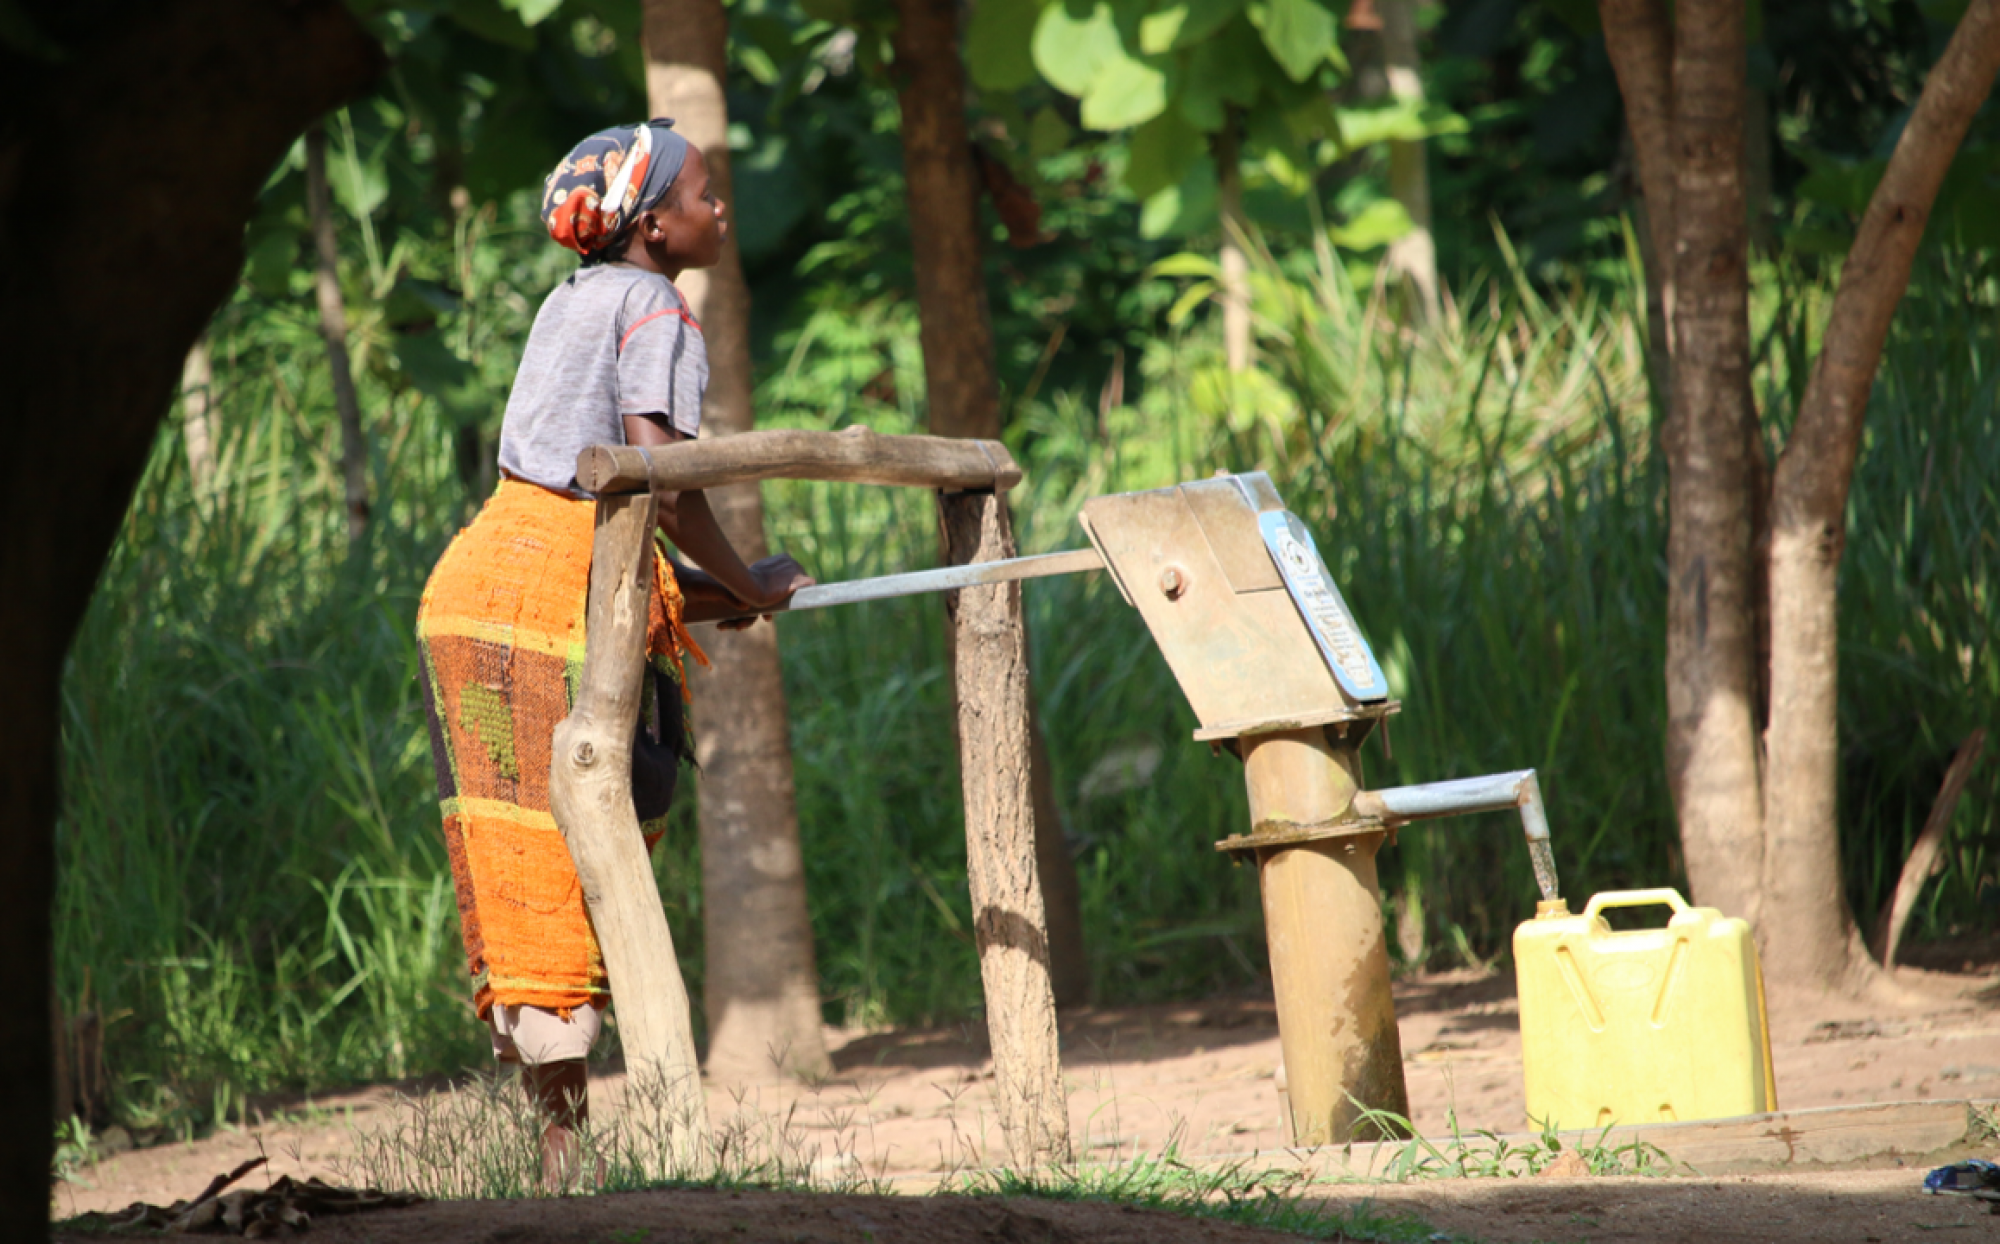 A refugee women fetches water at a local well in Northern Uganda